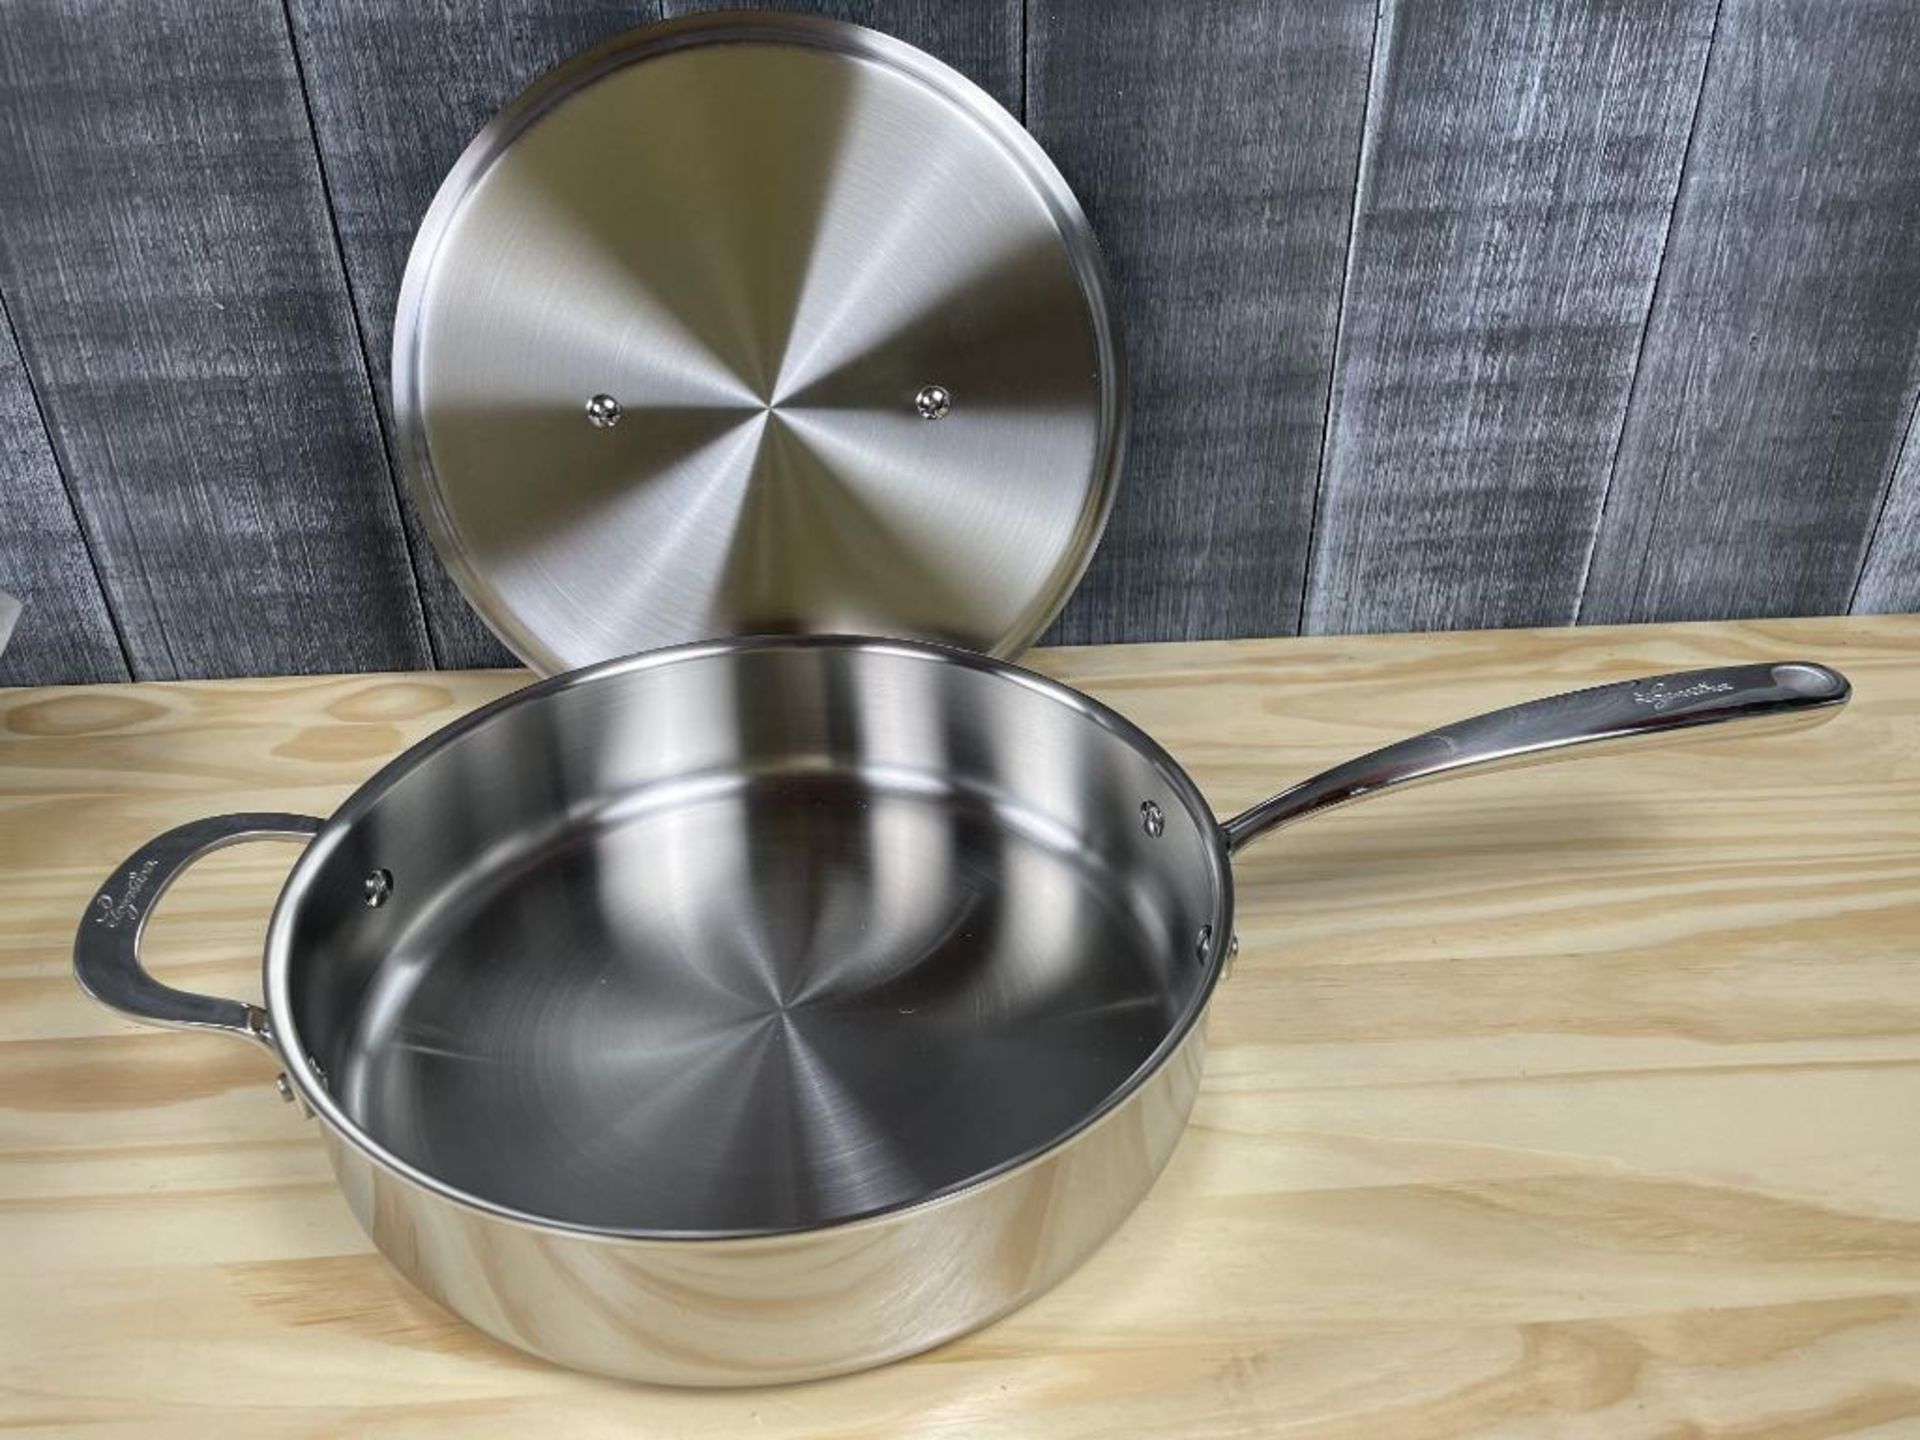 LAGOSTINA 3-PLY STAINLESS STEEL CLAD 3.4L SAUTE PAN WITH COVER